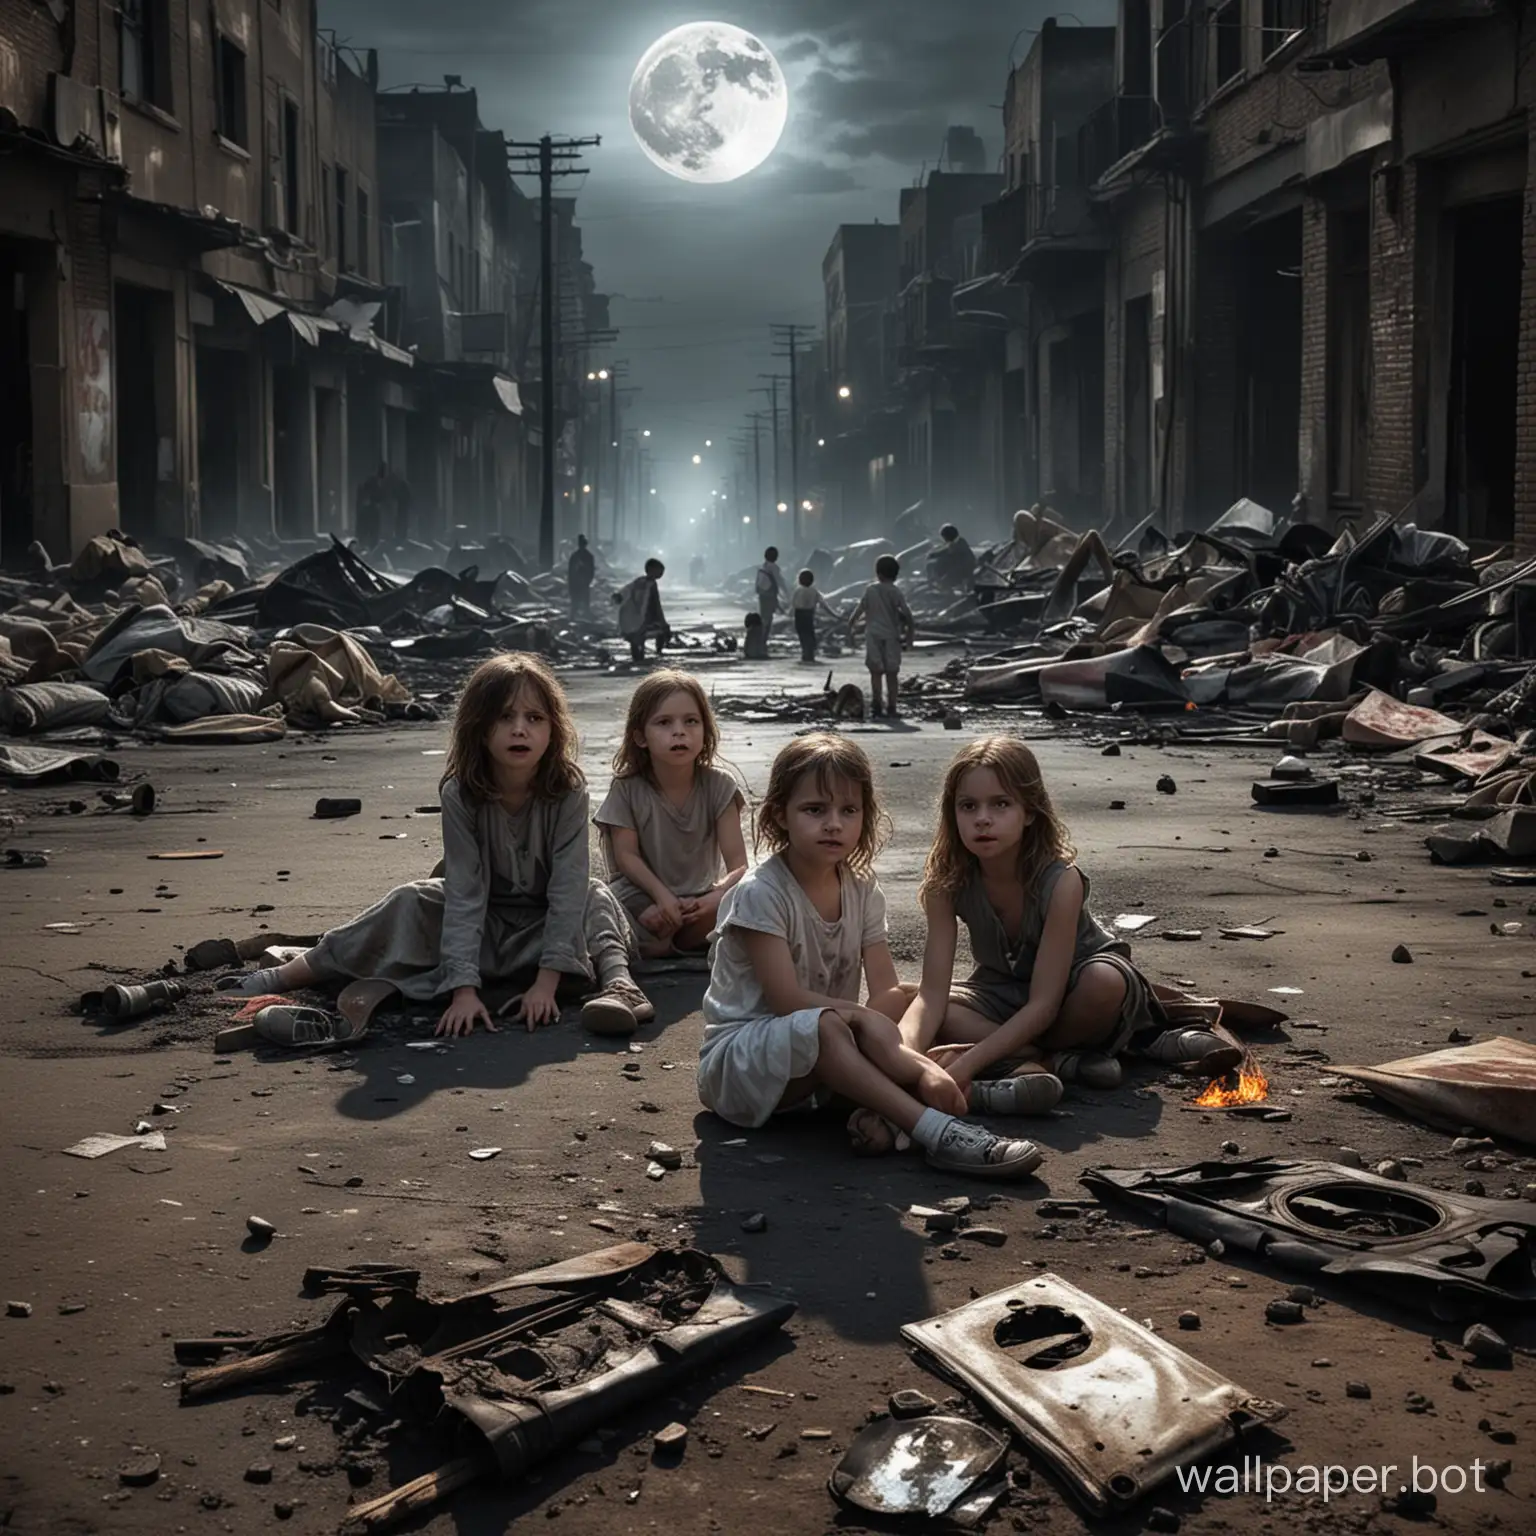 Crying-Children-in-Urban-War-Zone-with-Hovering-Dark-Angel